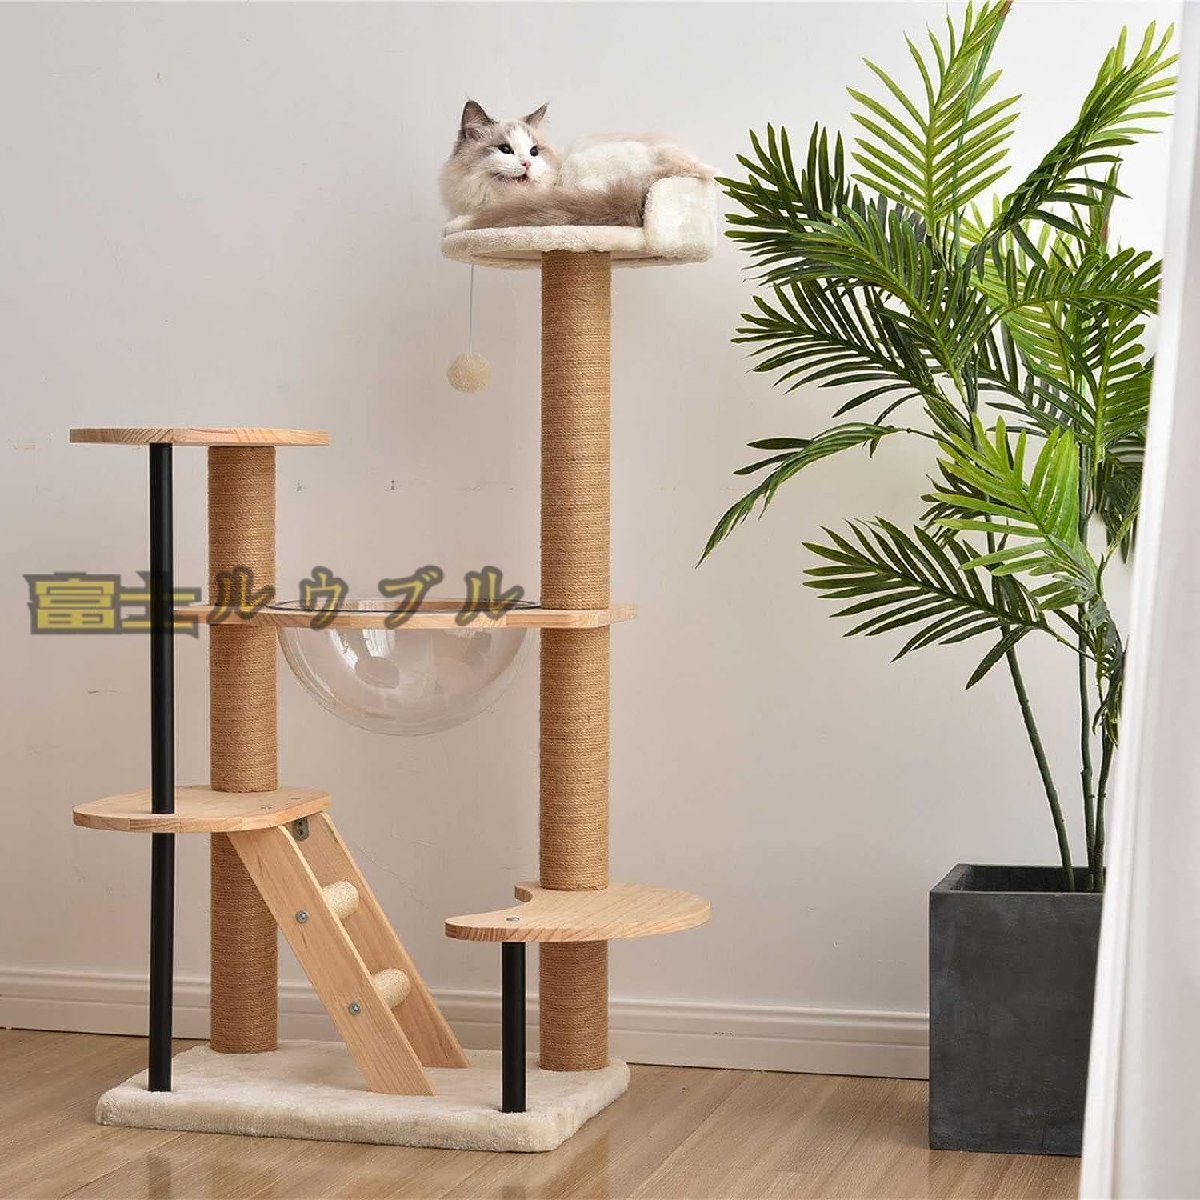  popular new goods * cat tower .. put wooden space ship many head stylish bonbon toy attaching flax nail .. ball cat house many head pet accessories 